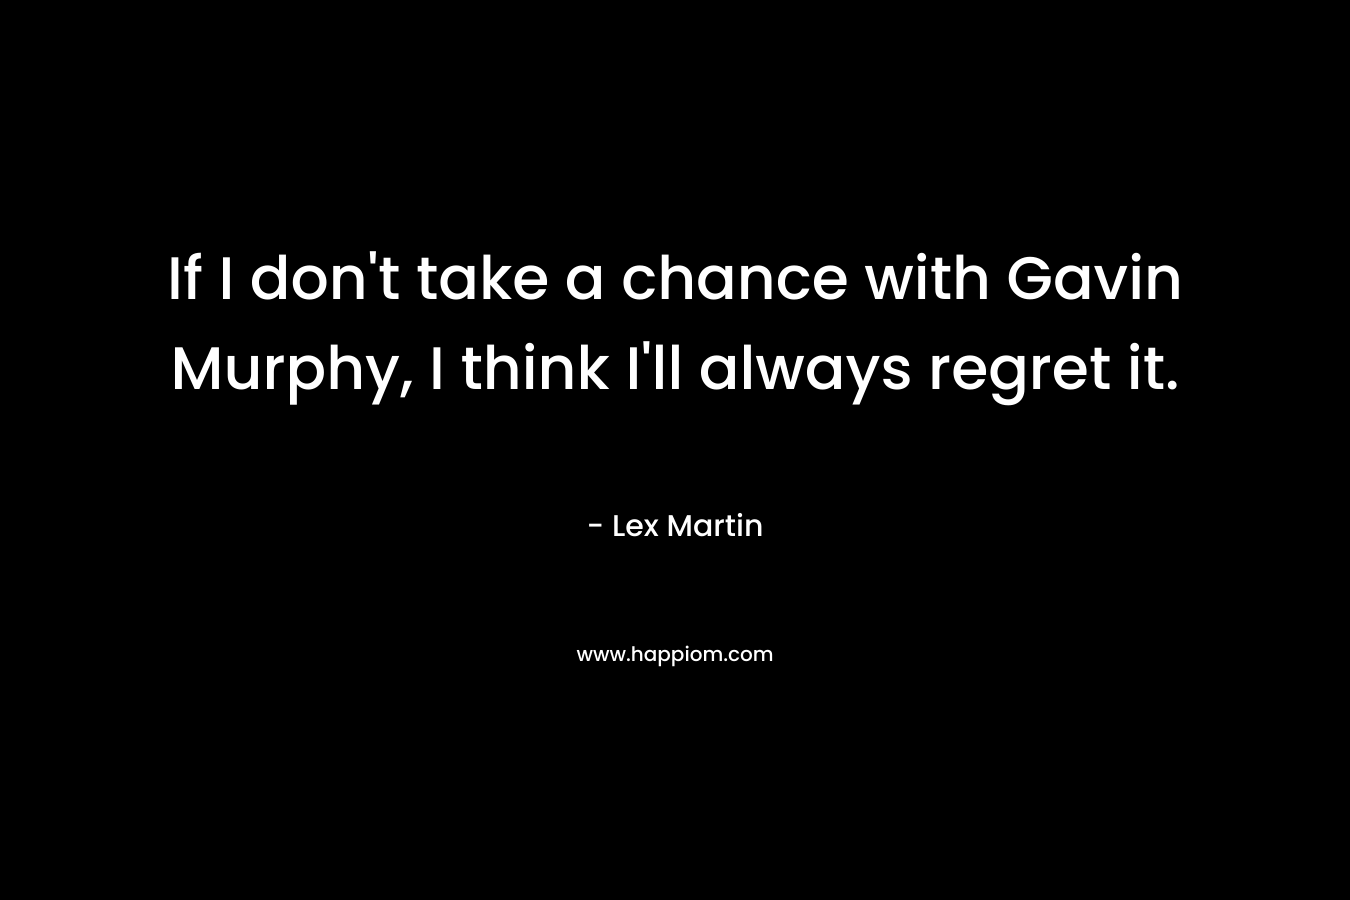 If I don’t take a chance with Gavin Murphy, I think I’ll always regret it. – Lex Martin